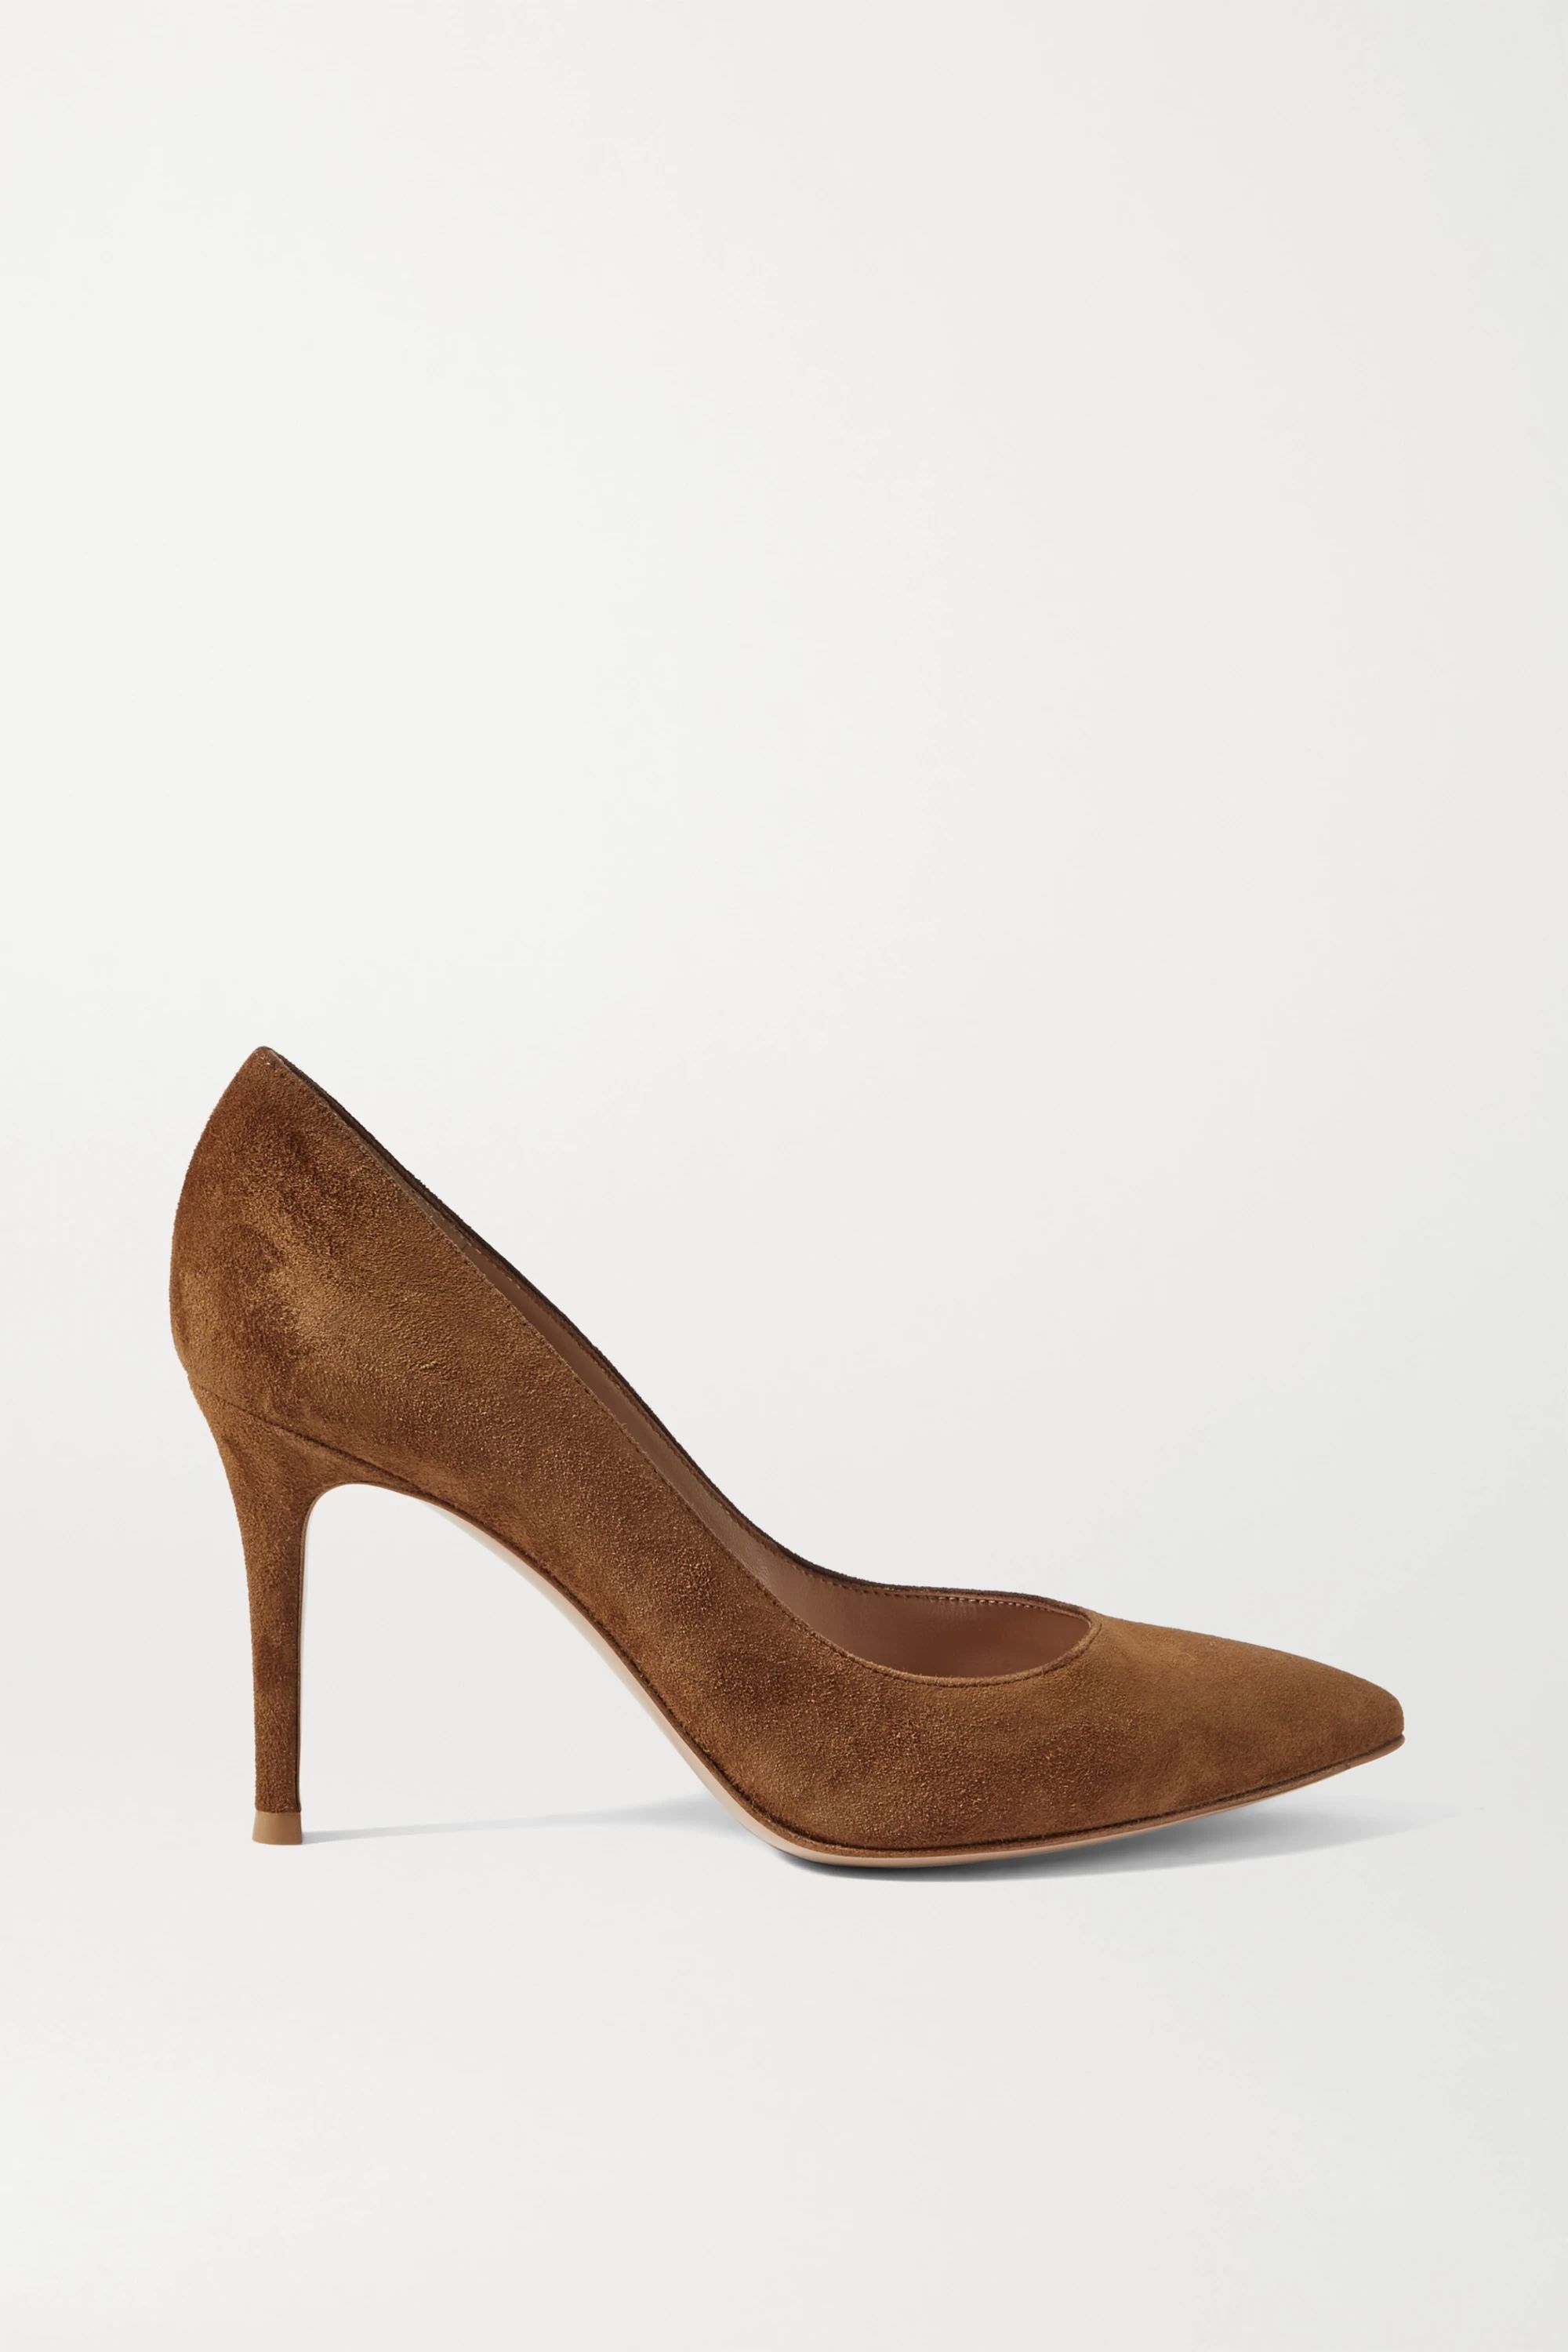 Brown 85 suede pumps | Gianvito Rossi | NET-A-PORTER | NET-A-PORTER (US)